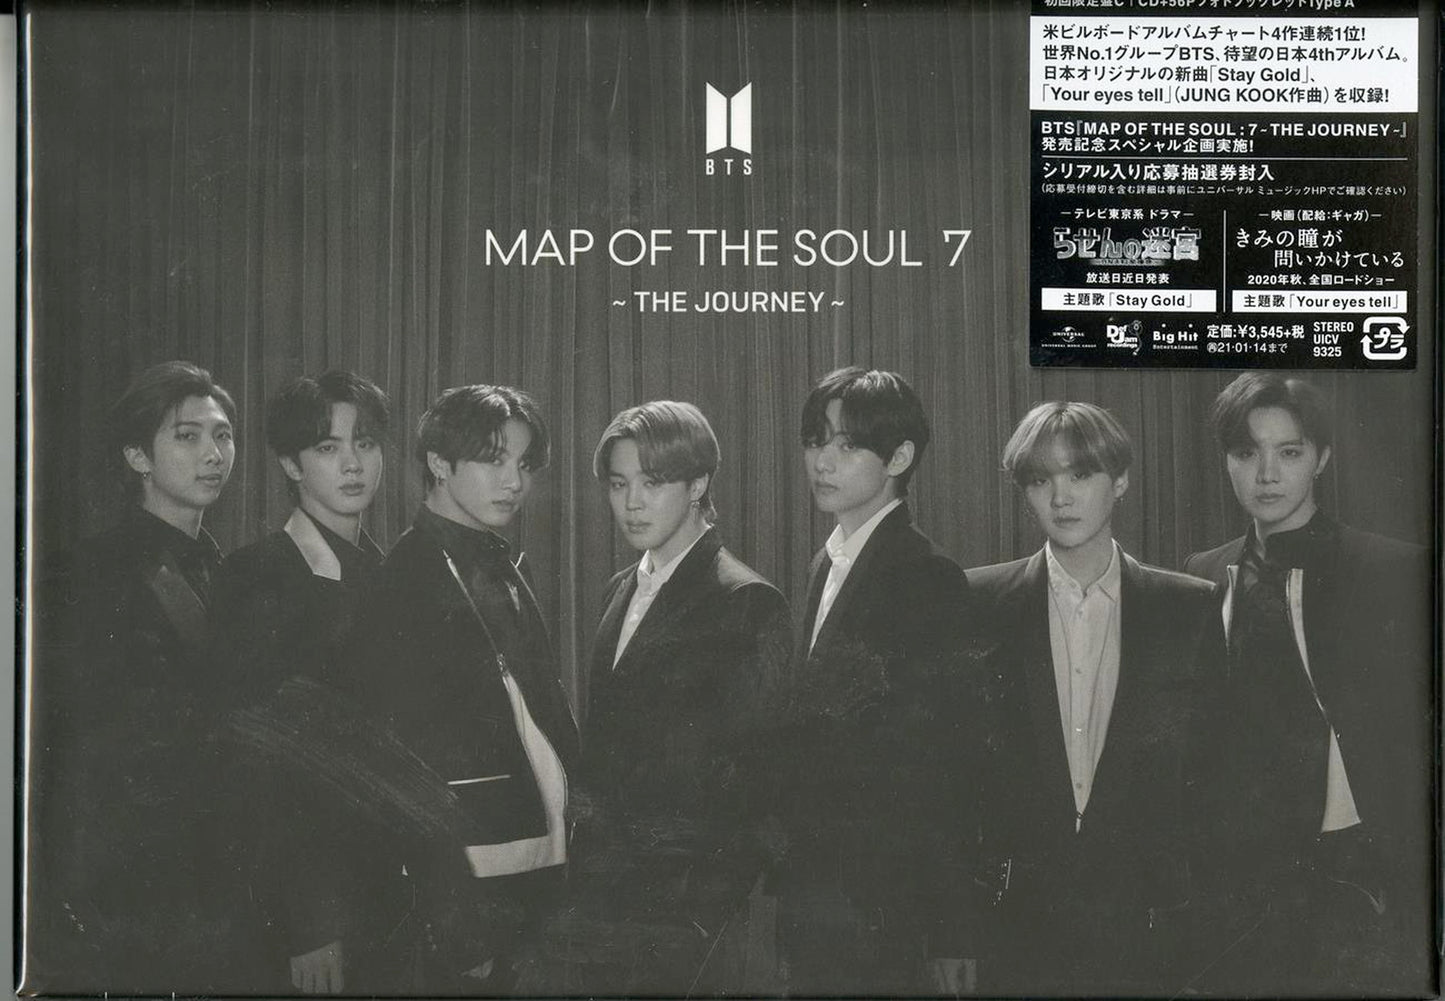 Bts - Map Of The Soul : 7 The Journey (Type-C) - Japan  CD+Book Limited Edition